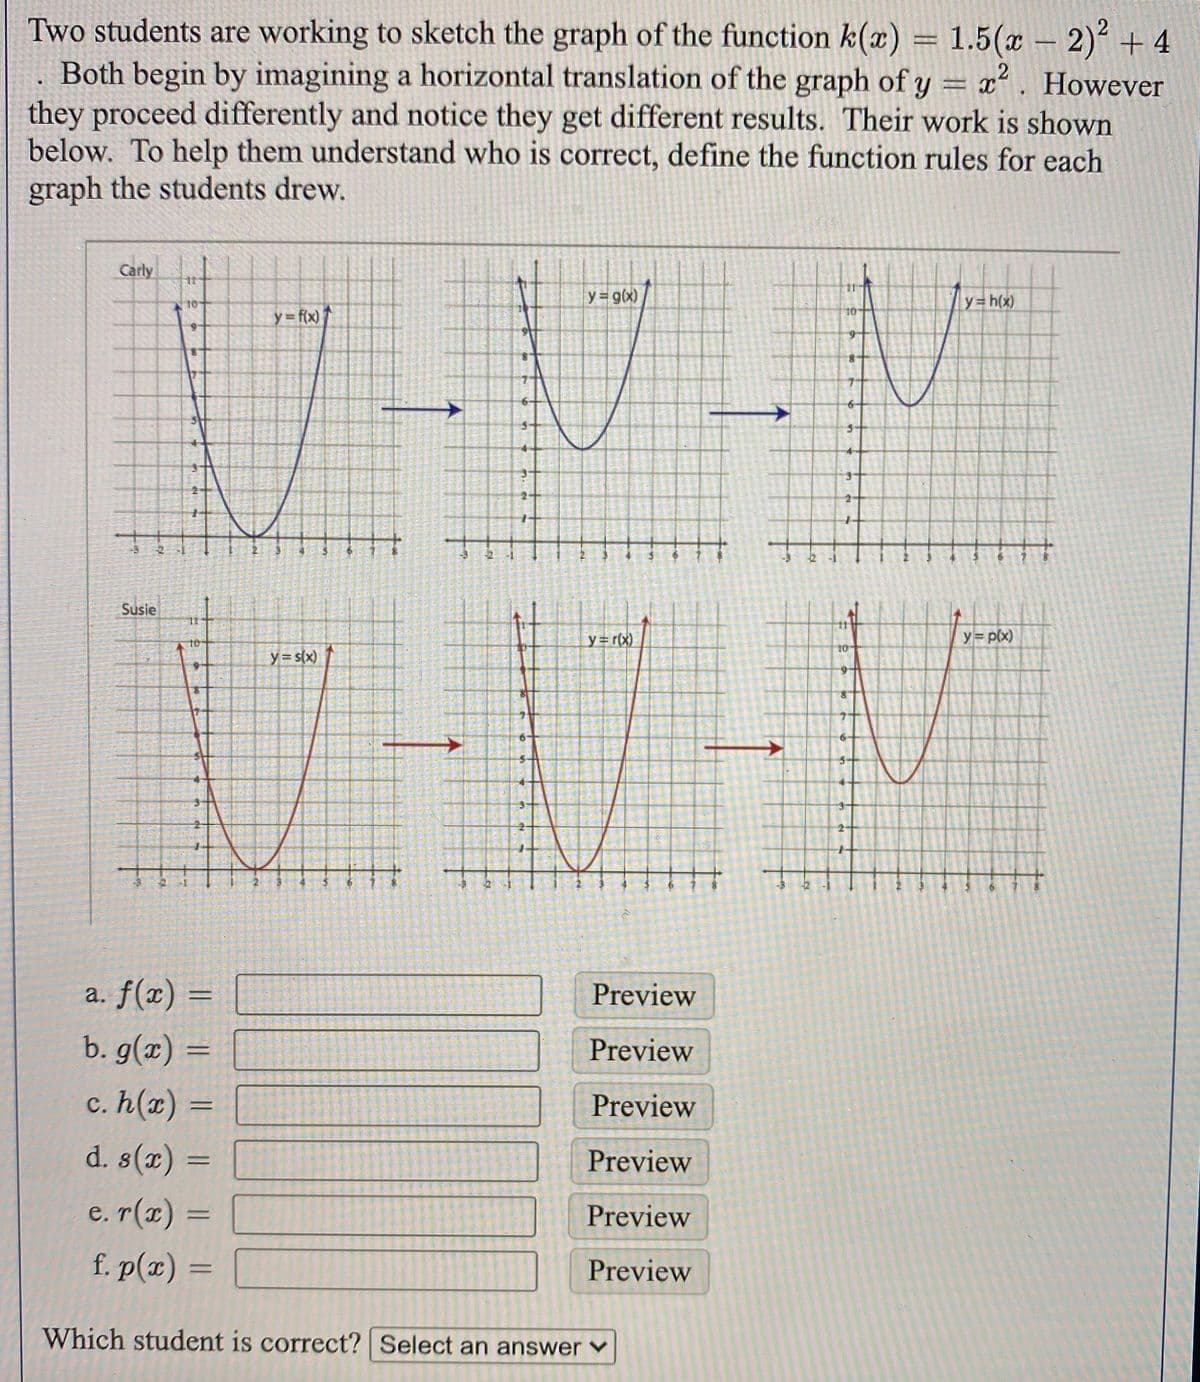 Two students are working to sketch the graph of the function k(x) = 1.5(x – 2)² + 4
Both begin by imagining a horizontal translation of the graph of y = x. However
they proceed differently and notice they get different results. Their work is shown
below. To help them understand who is correct, define the function rules for each
graph the students drew.
Carly
y g(x)
y=h(x)
10
y = f(x)
Susie
y=r(x)
y p(x)
10
y= s(x)
a. f(x) =
Preview
b. g(x) =
Preview
%3D
c. h(x) =
d. s(x) =
Preview
Preview
e. r(x) =
f. p(x) = [|
Preview
Preview
Which student is correct? Select an answer ♥
